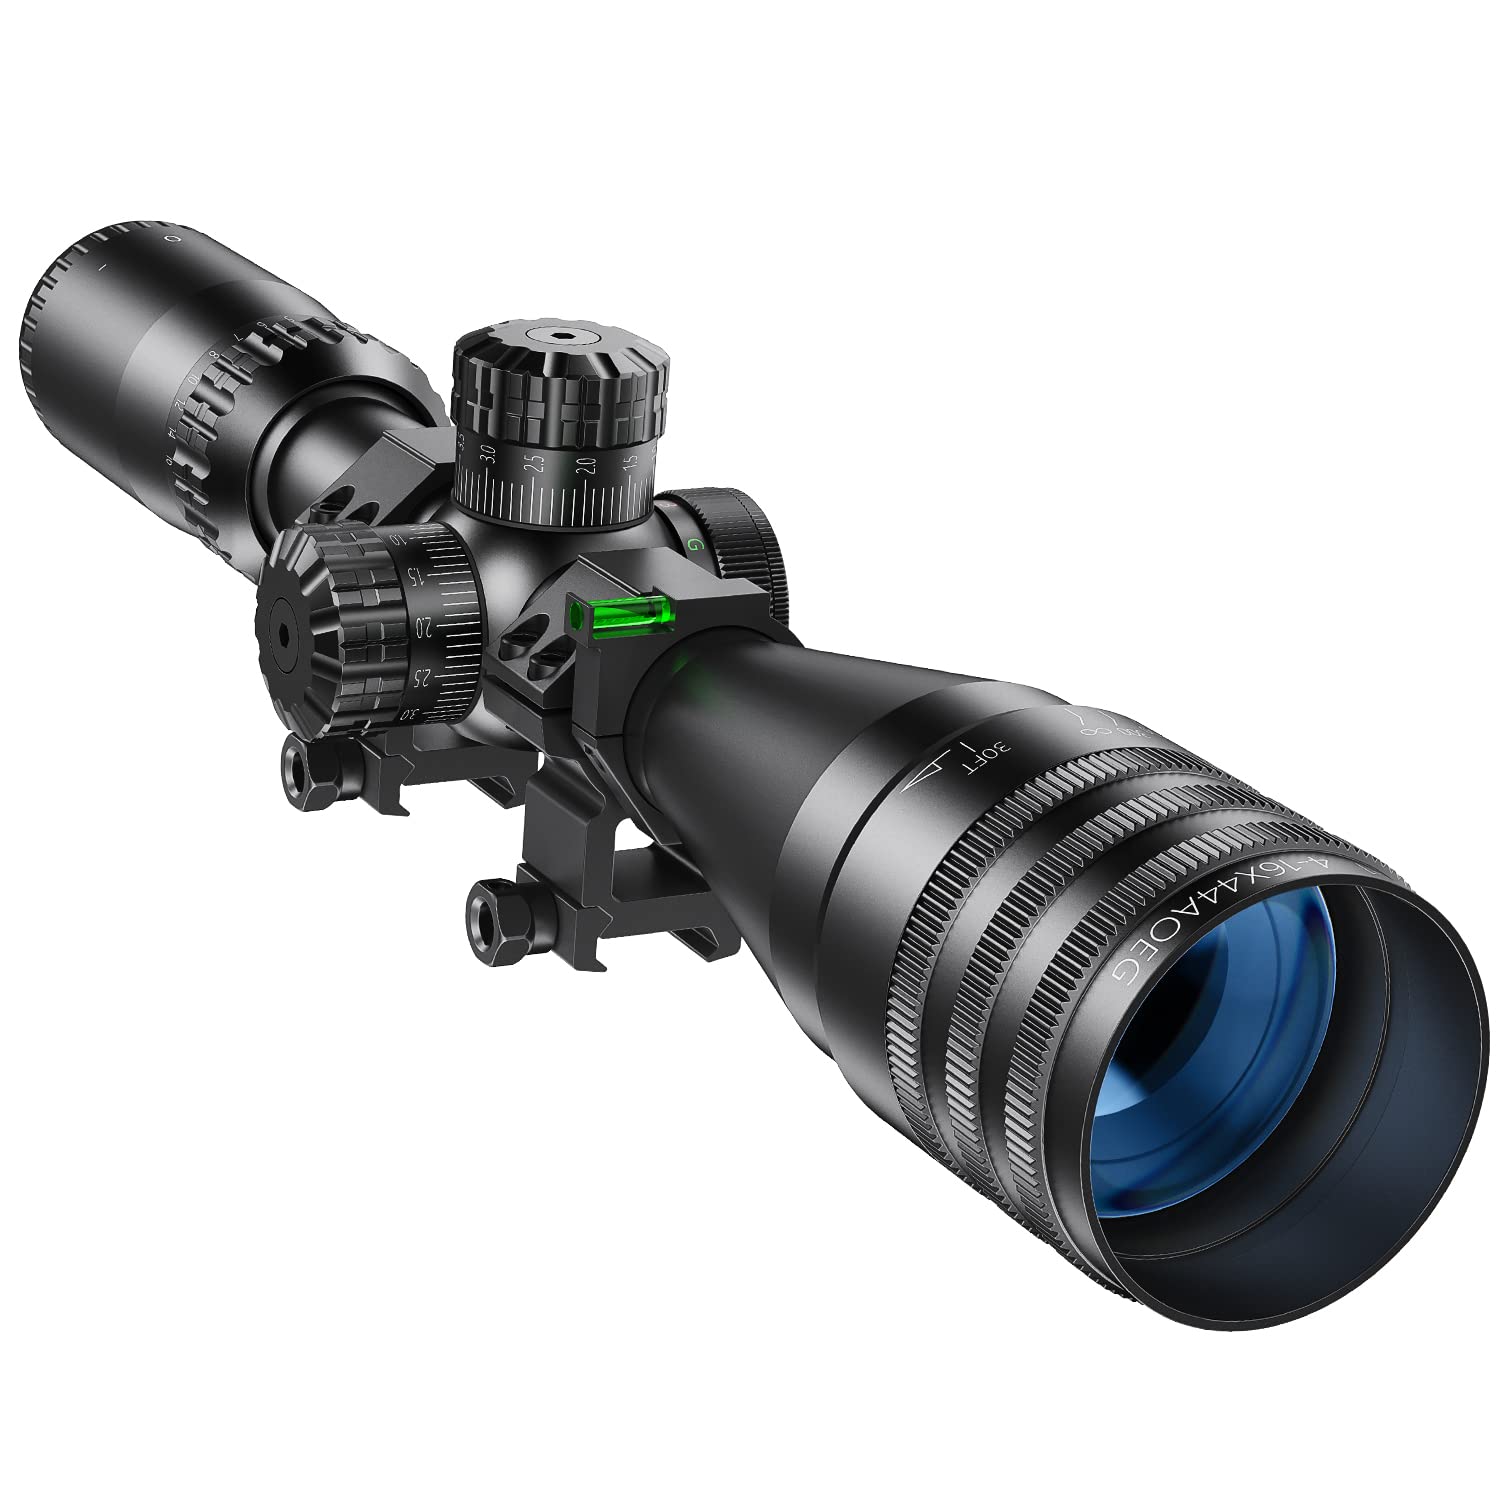 BESTSIGHT 4-16x44 Tactical Rifle Scope Red and Green Illuminated Built Gun Scope with Locking Turret Sunshade and Mount Included